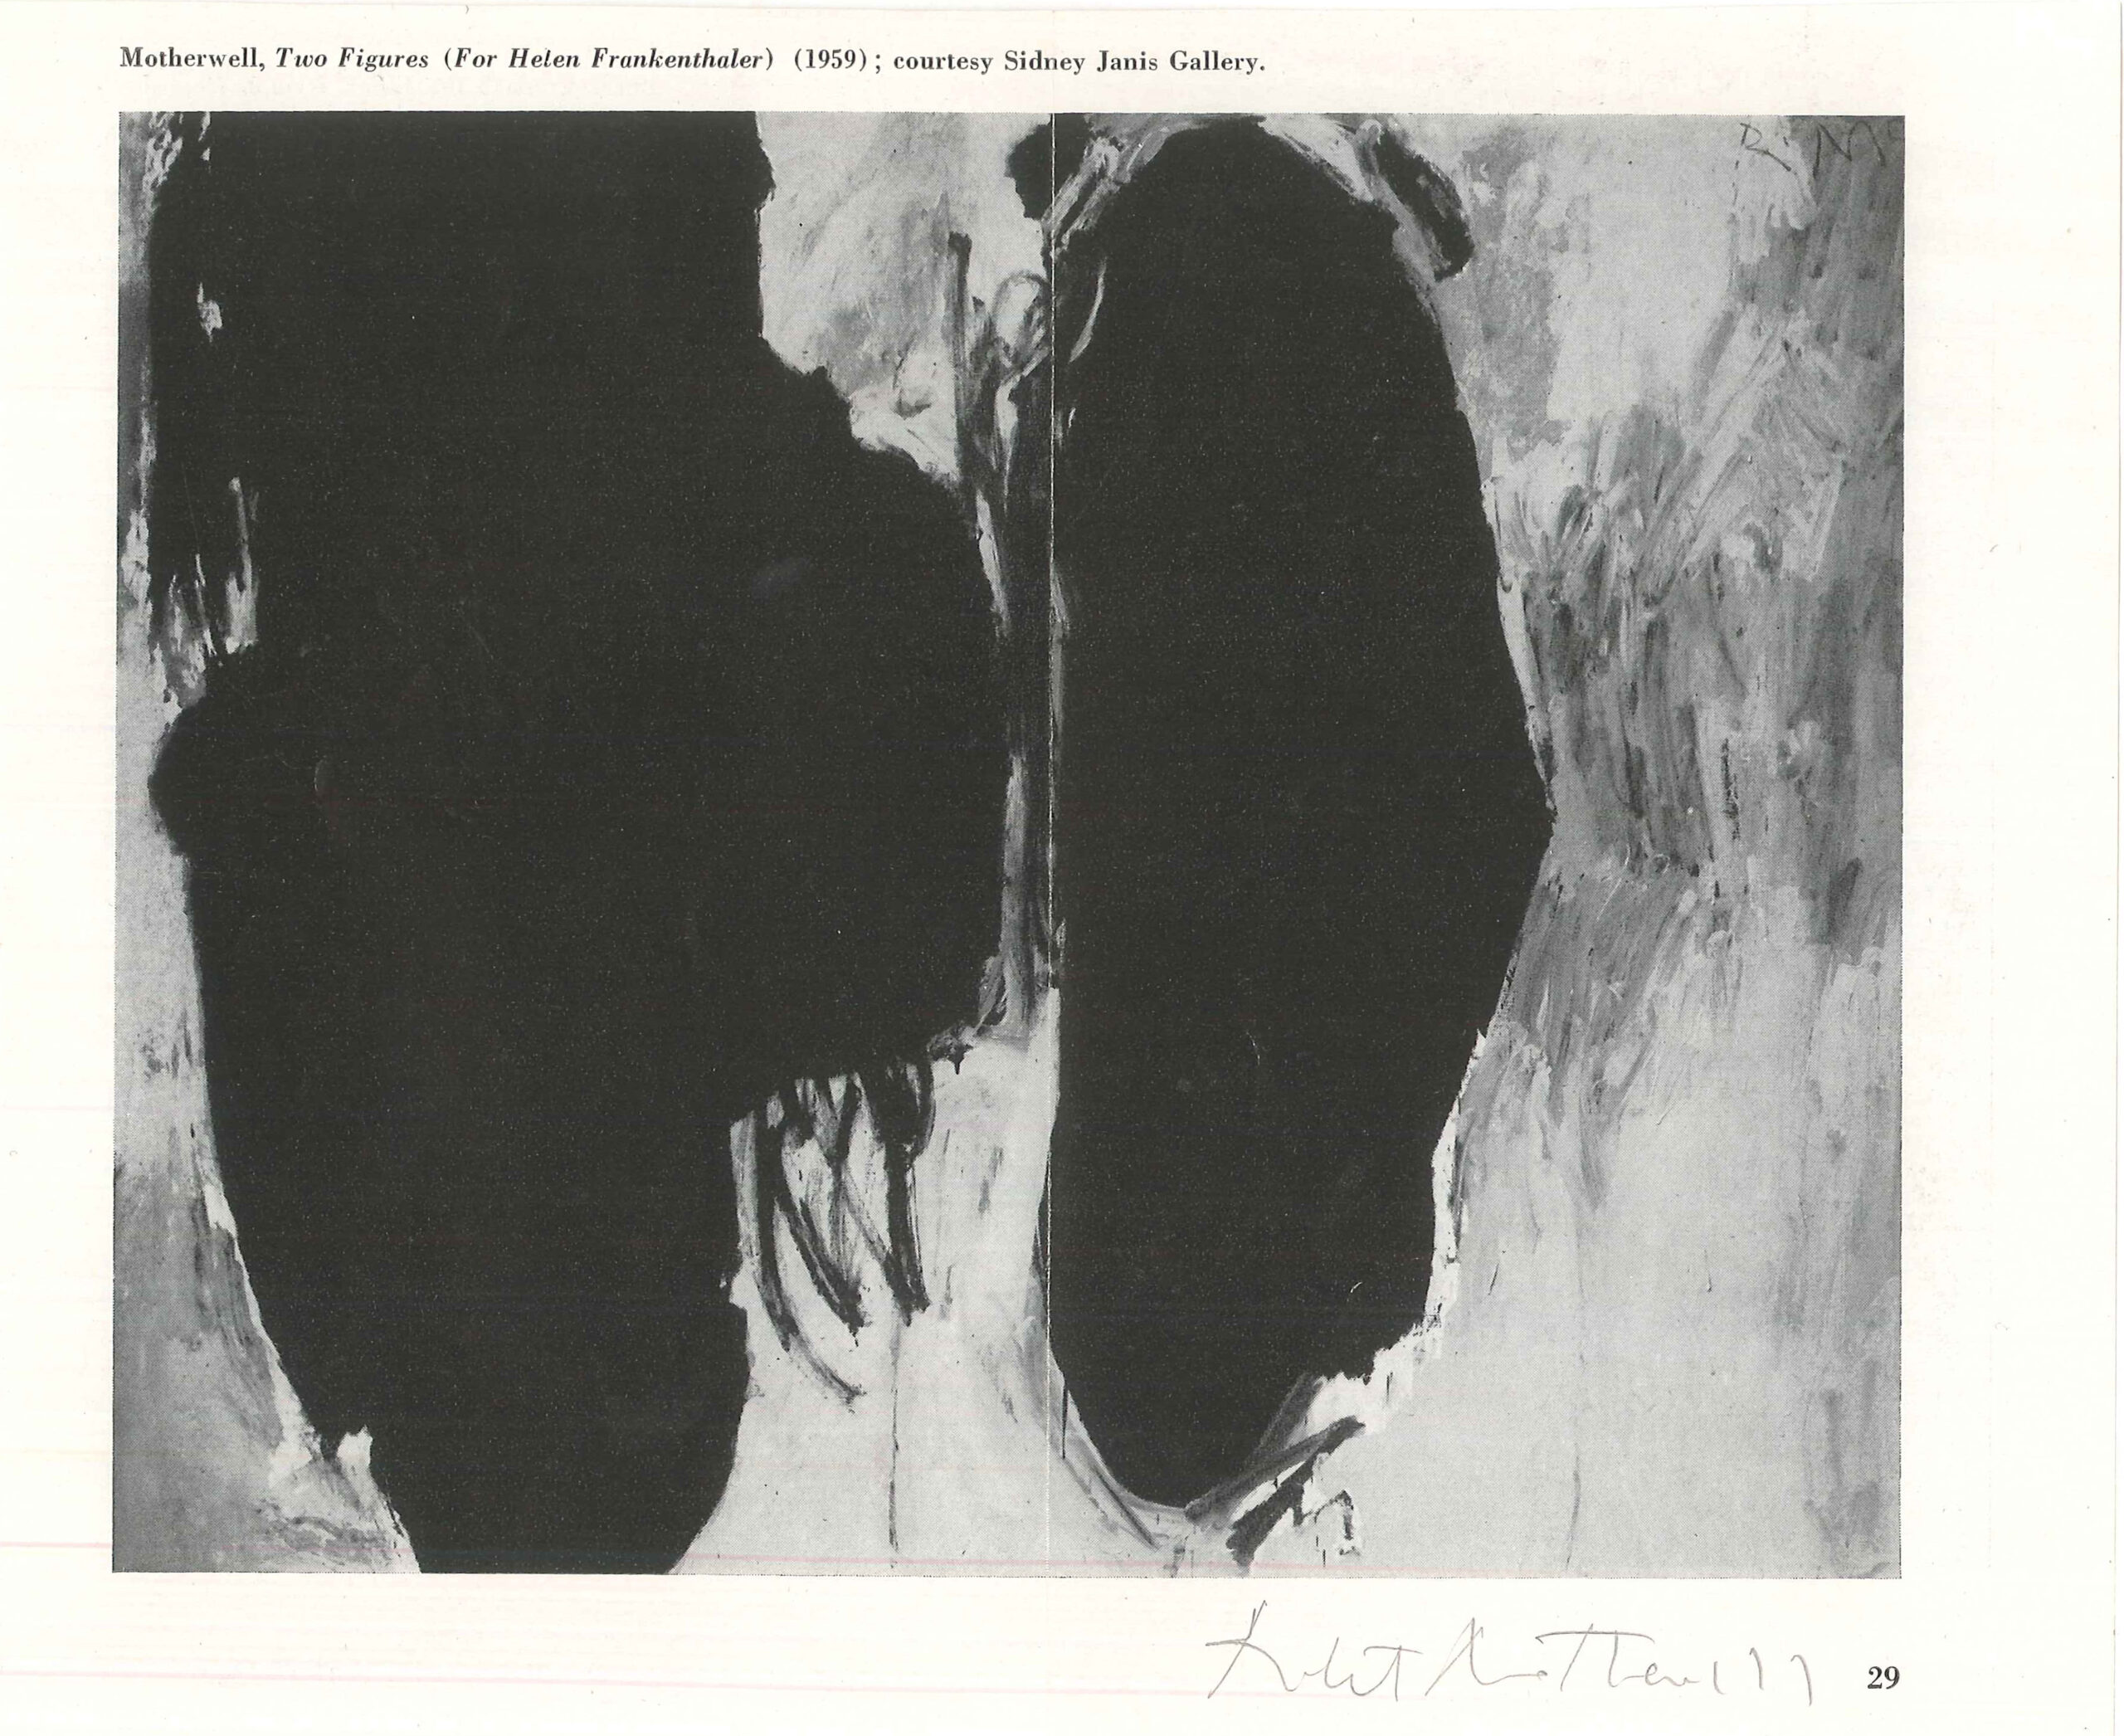 Clipping of Two Figures (For Helen Frankenthaler) signed by Motherwell (ca. 1960s), 1960